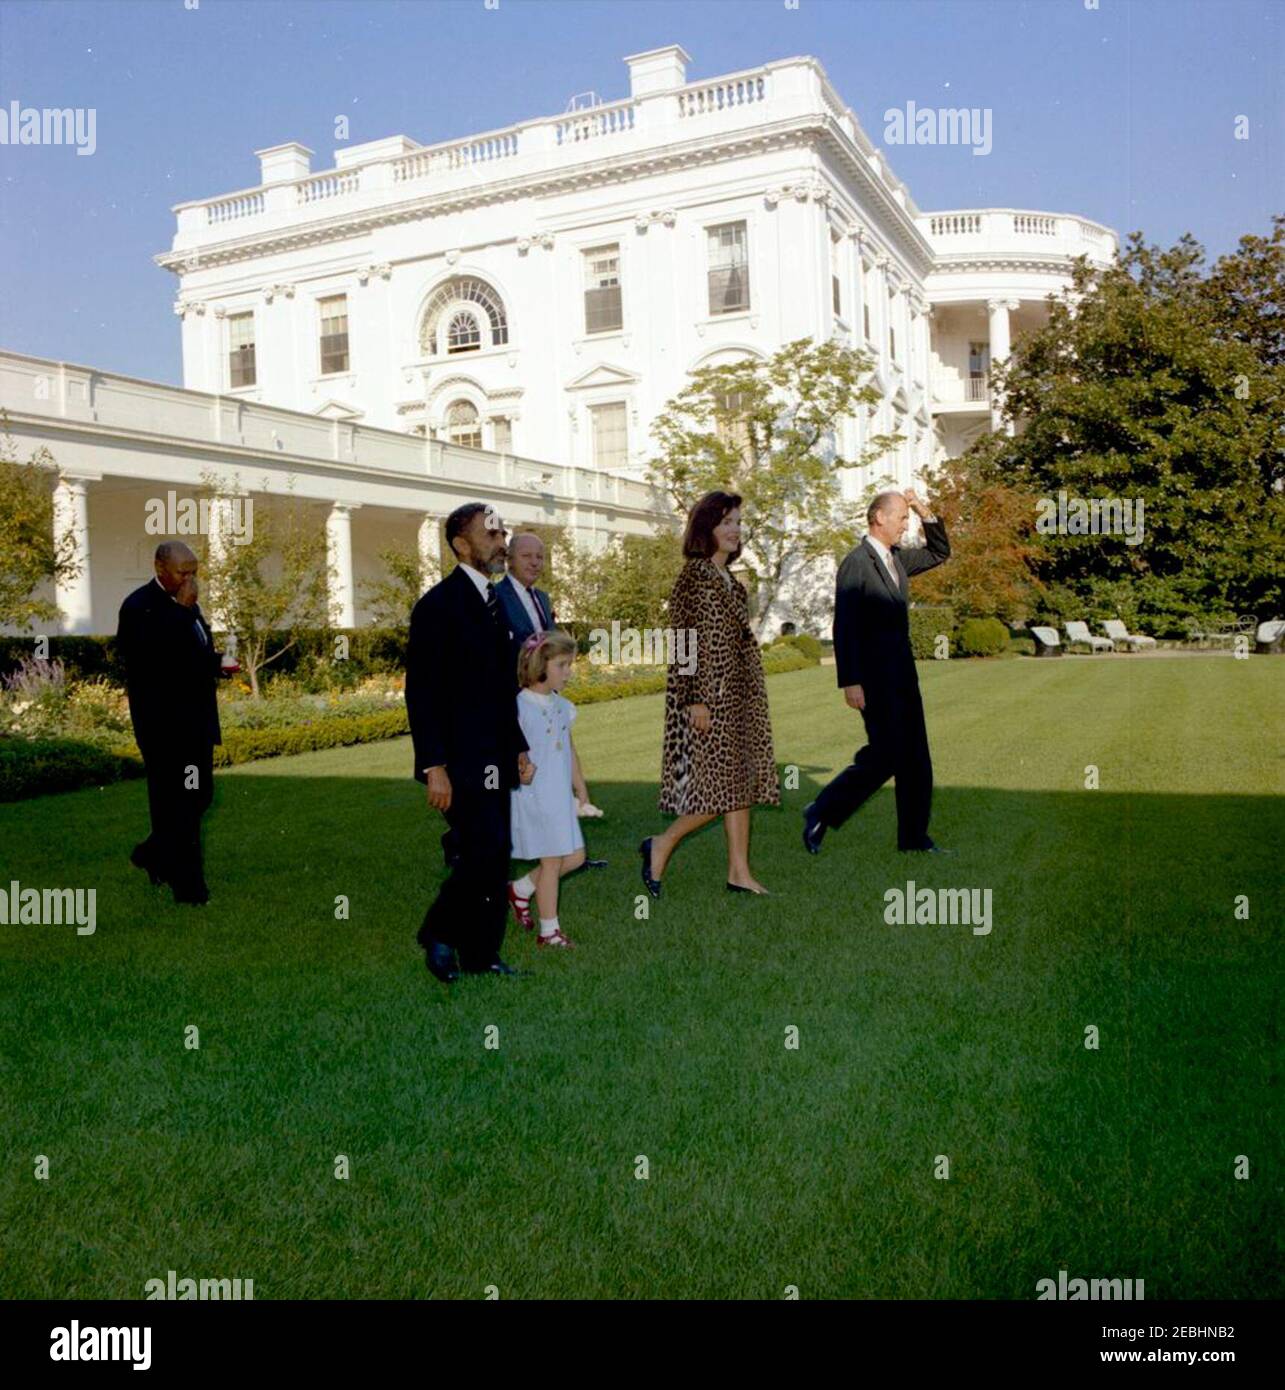 Meeting with Haile Selassie I, Emperor of Ethiopia, 4:33PM. First Lady Jacqueline Kennedy walks with Emperor of Ethiopia, Haile Selassie I, through the Rose Garden of the White House. Left to right: Minister of the Imperial Court of Ethiopia, Tafarra-Worq Kidane-Wold; Emperor Selassie; Caroline Kennedy; U.S. State Department Protocol officer, Jay Rutherfurd (behind); Mrs. Kennedy; U.S. Chief of Protocol, Angier Biddle Duke. The Emperor presented as gifts to the Kennedy family a leopard coat and gold filigree jewelry case for the First Lady and carved ivory figurines for Caroline and John F. Ke Stock Photo